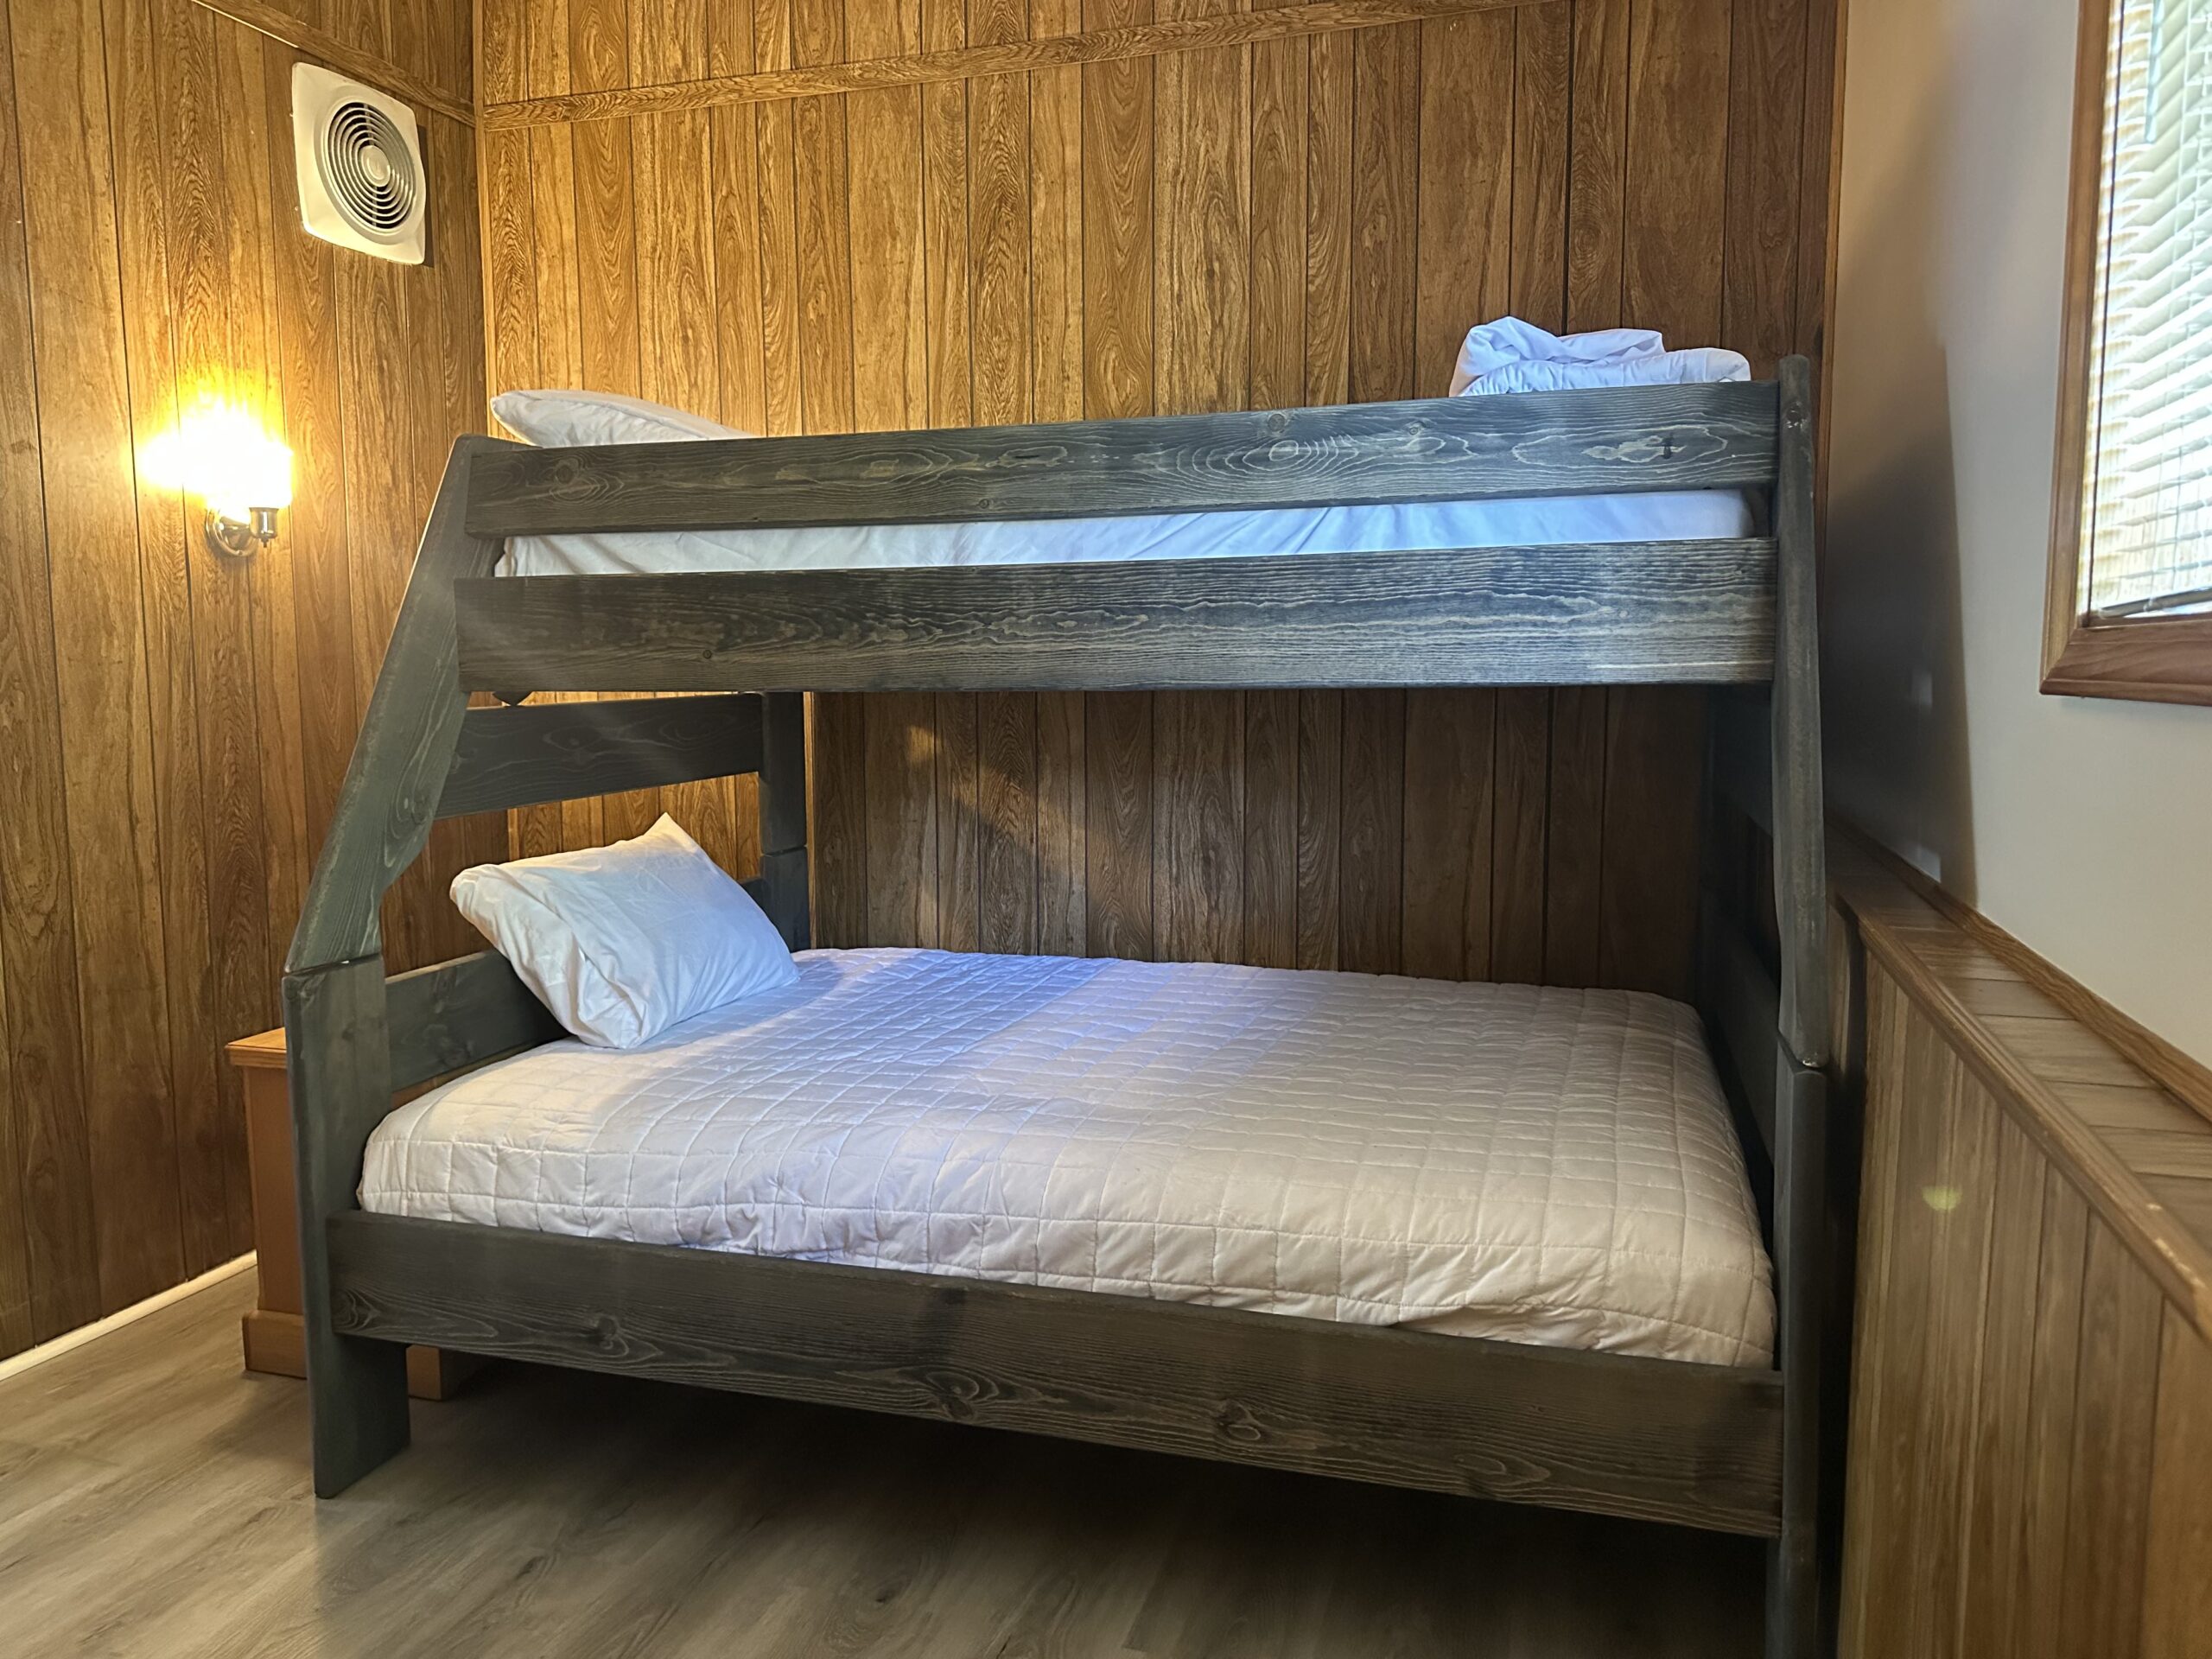 a bunk bed in a room with wood paneling